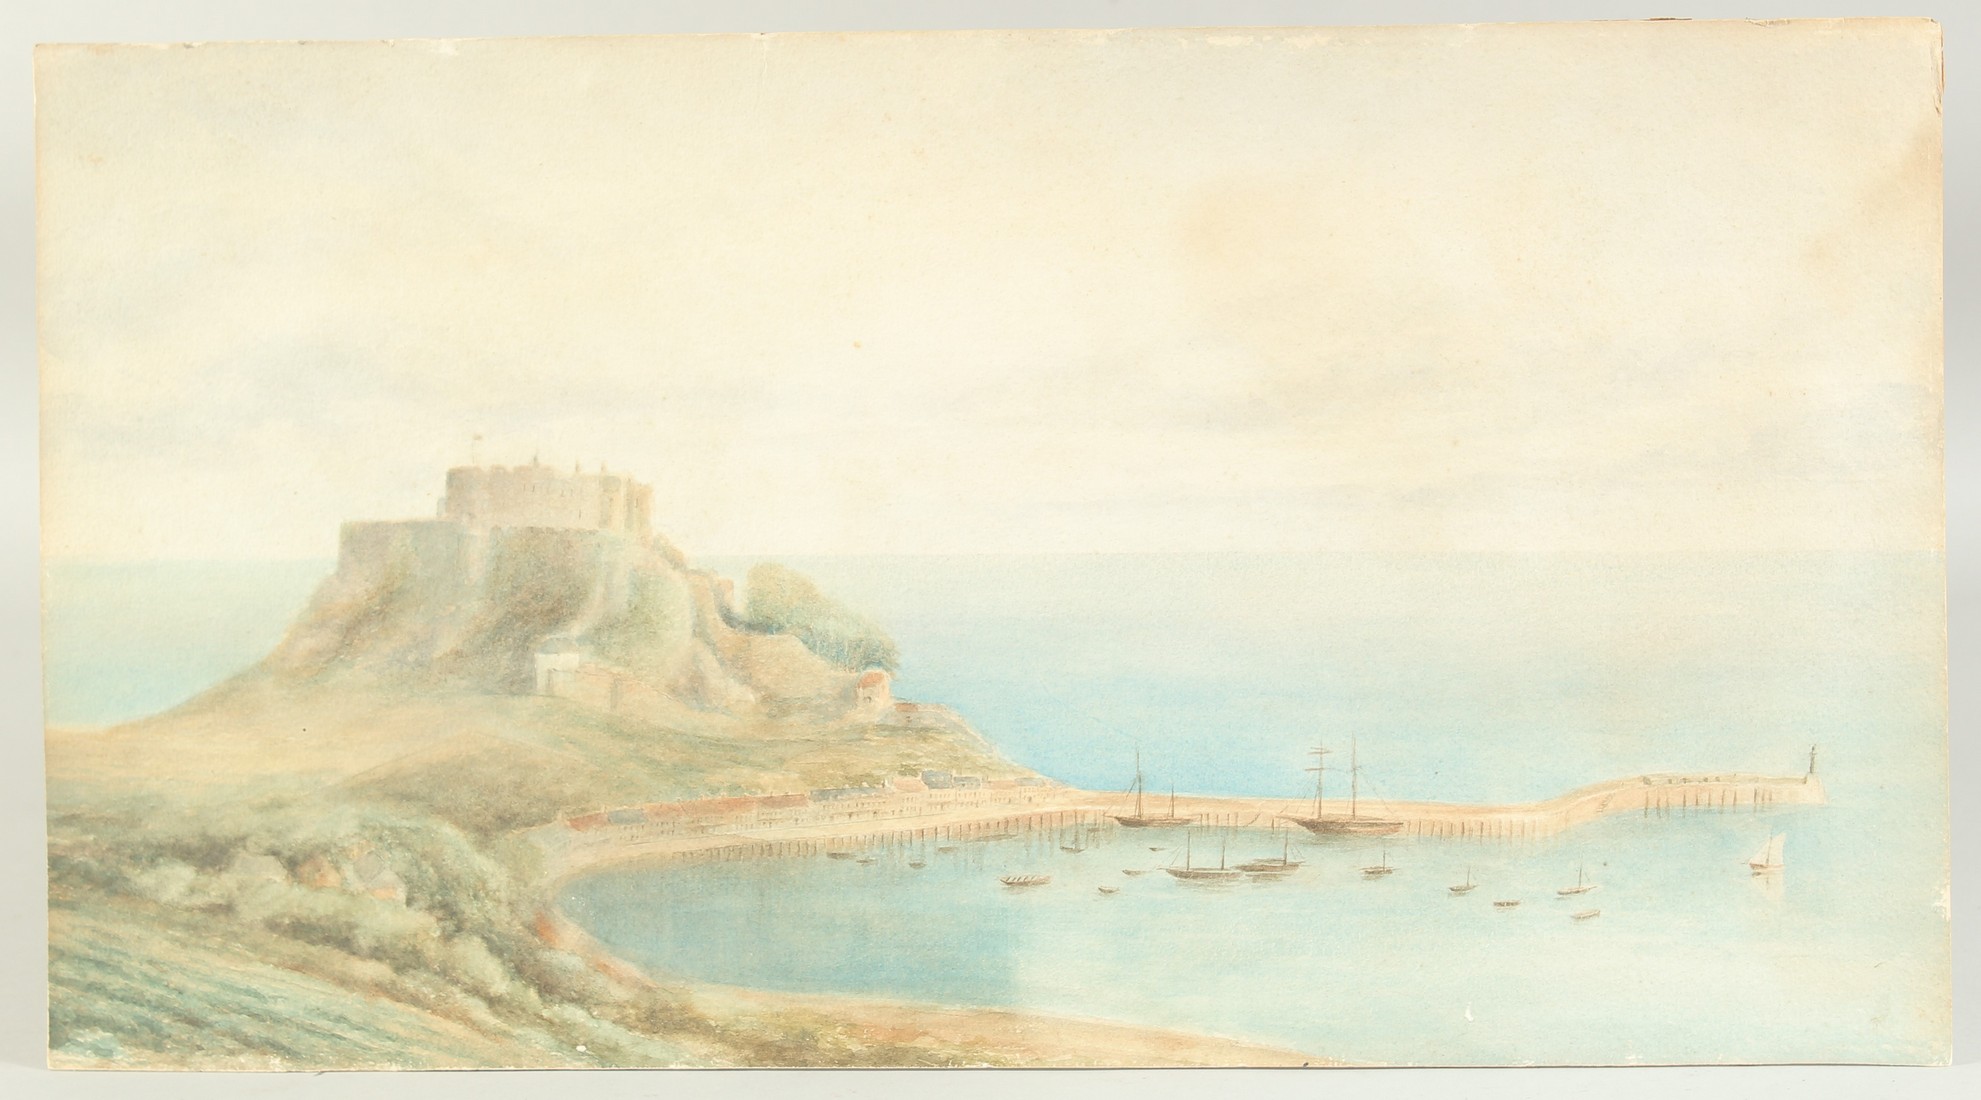 English School (19th/20th Century), A view of Corey castle and harbour, Jersey, watercolour, 10.5" x